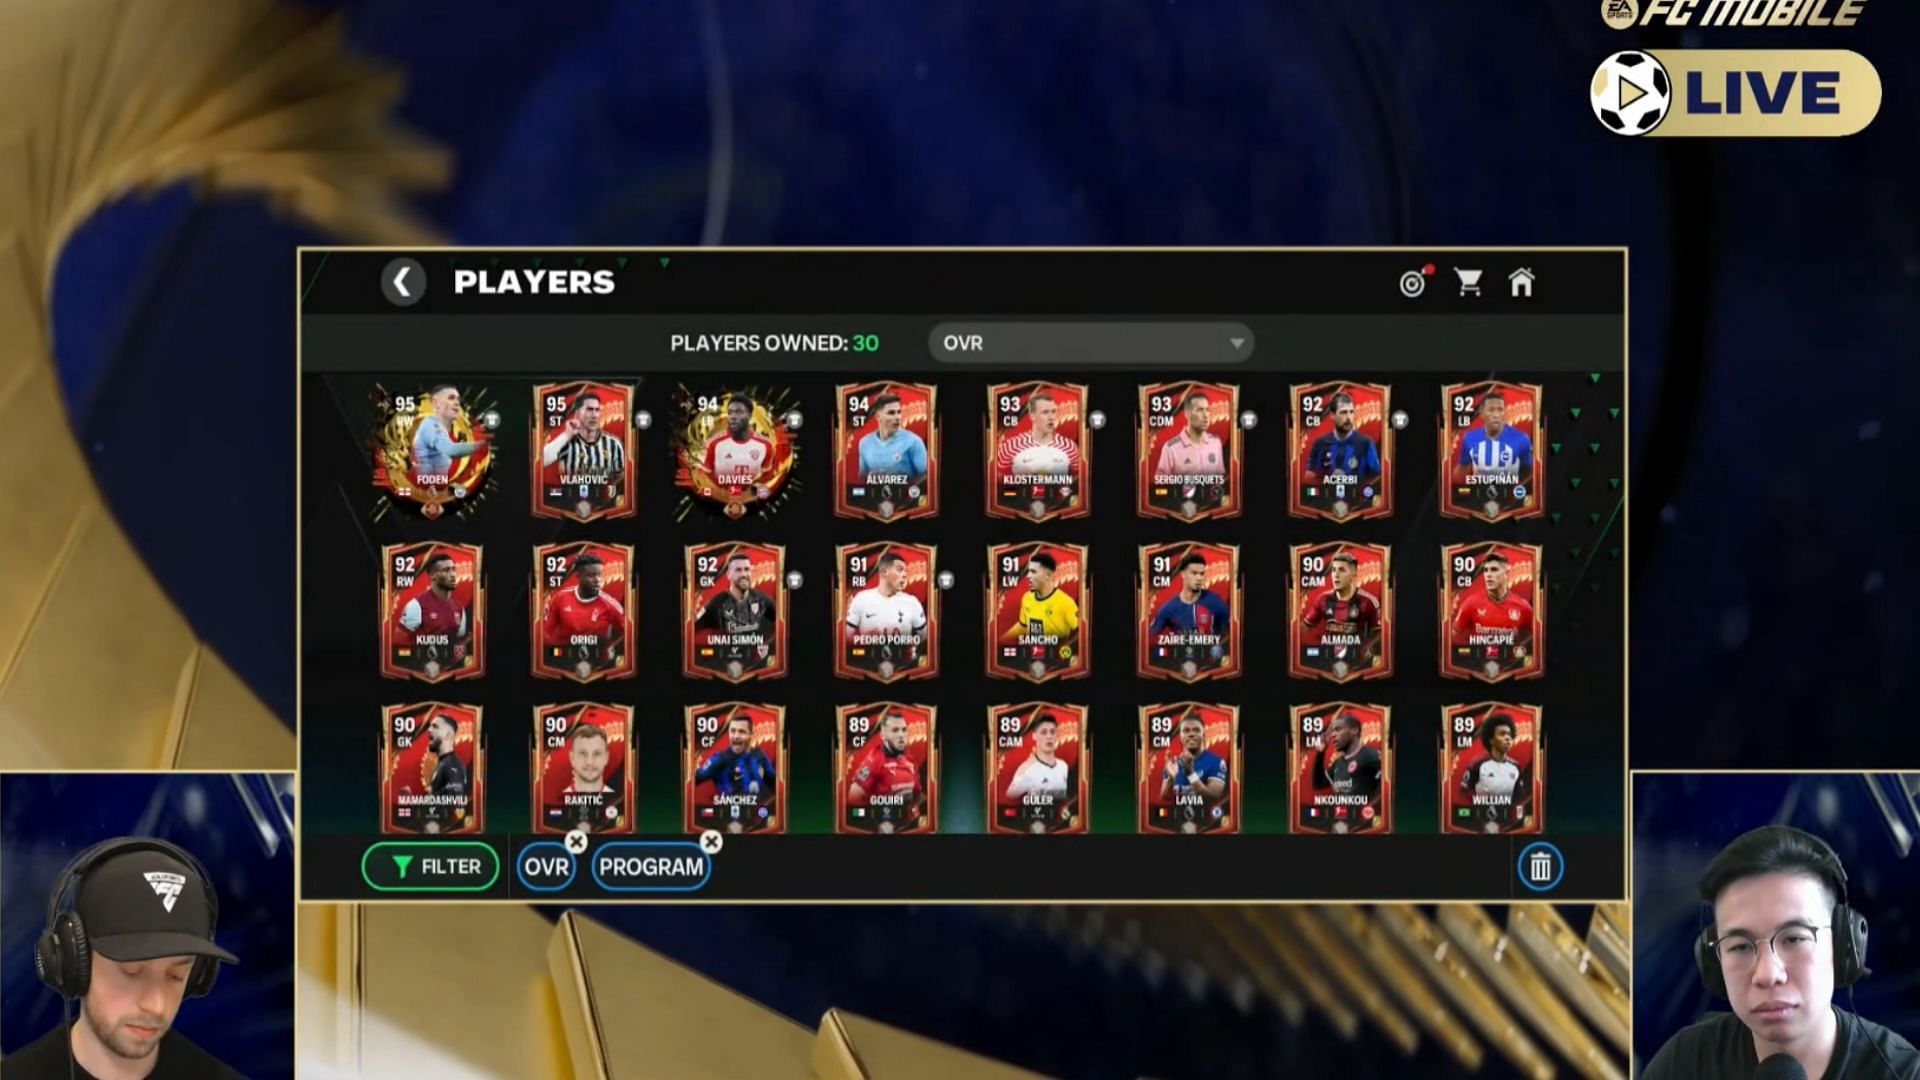 Snippet showing Antwan and Tak providing details of new FC Mobile Lunar New Year cards (Image via YouTube/EA Sports FC Mobile)